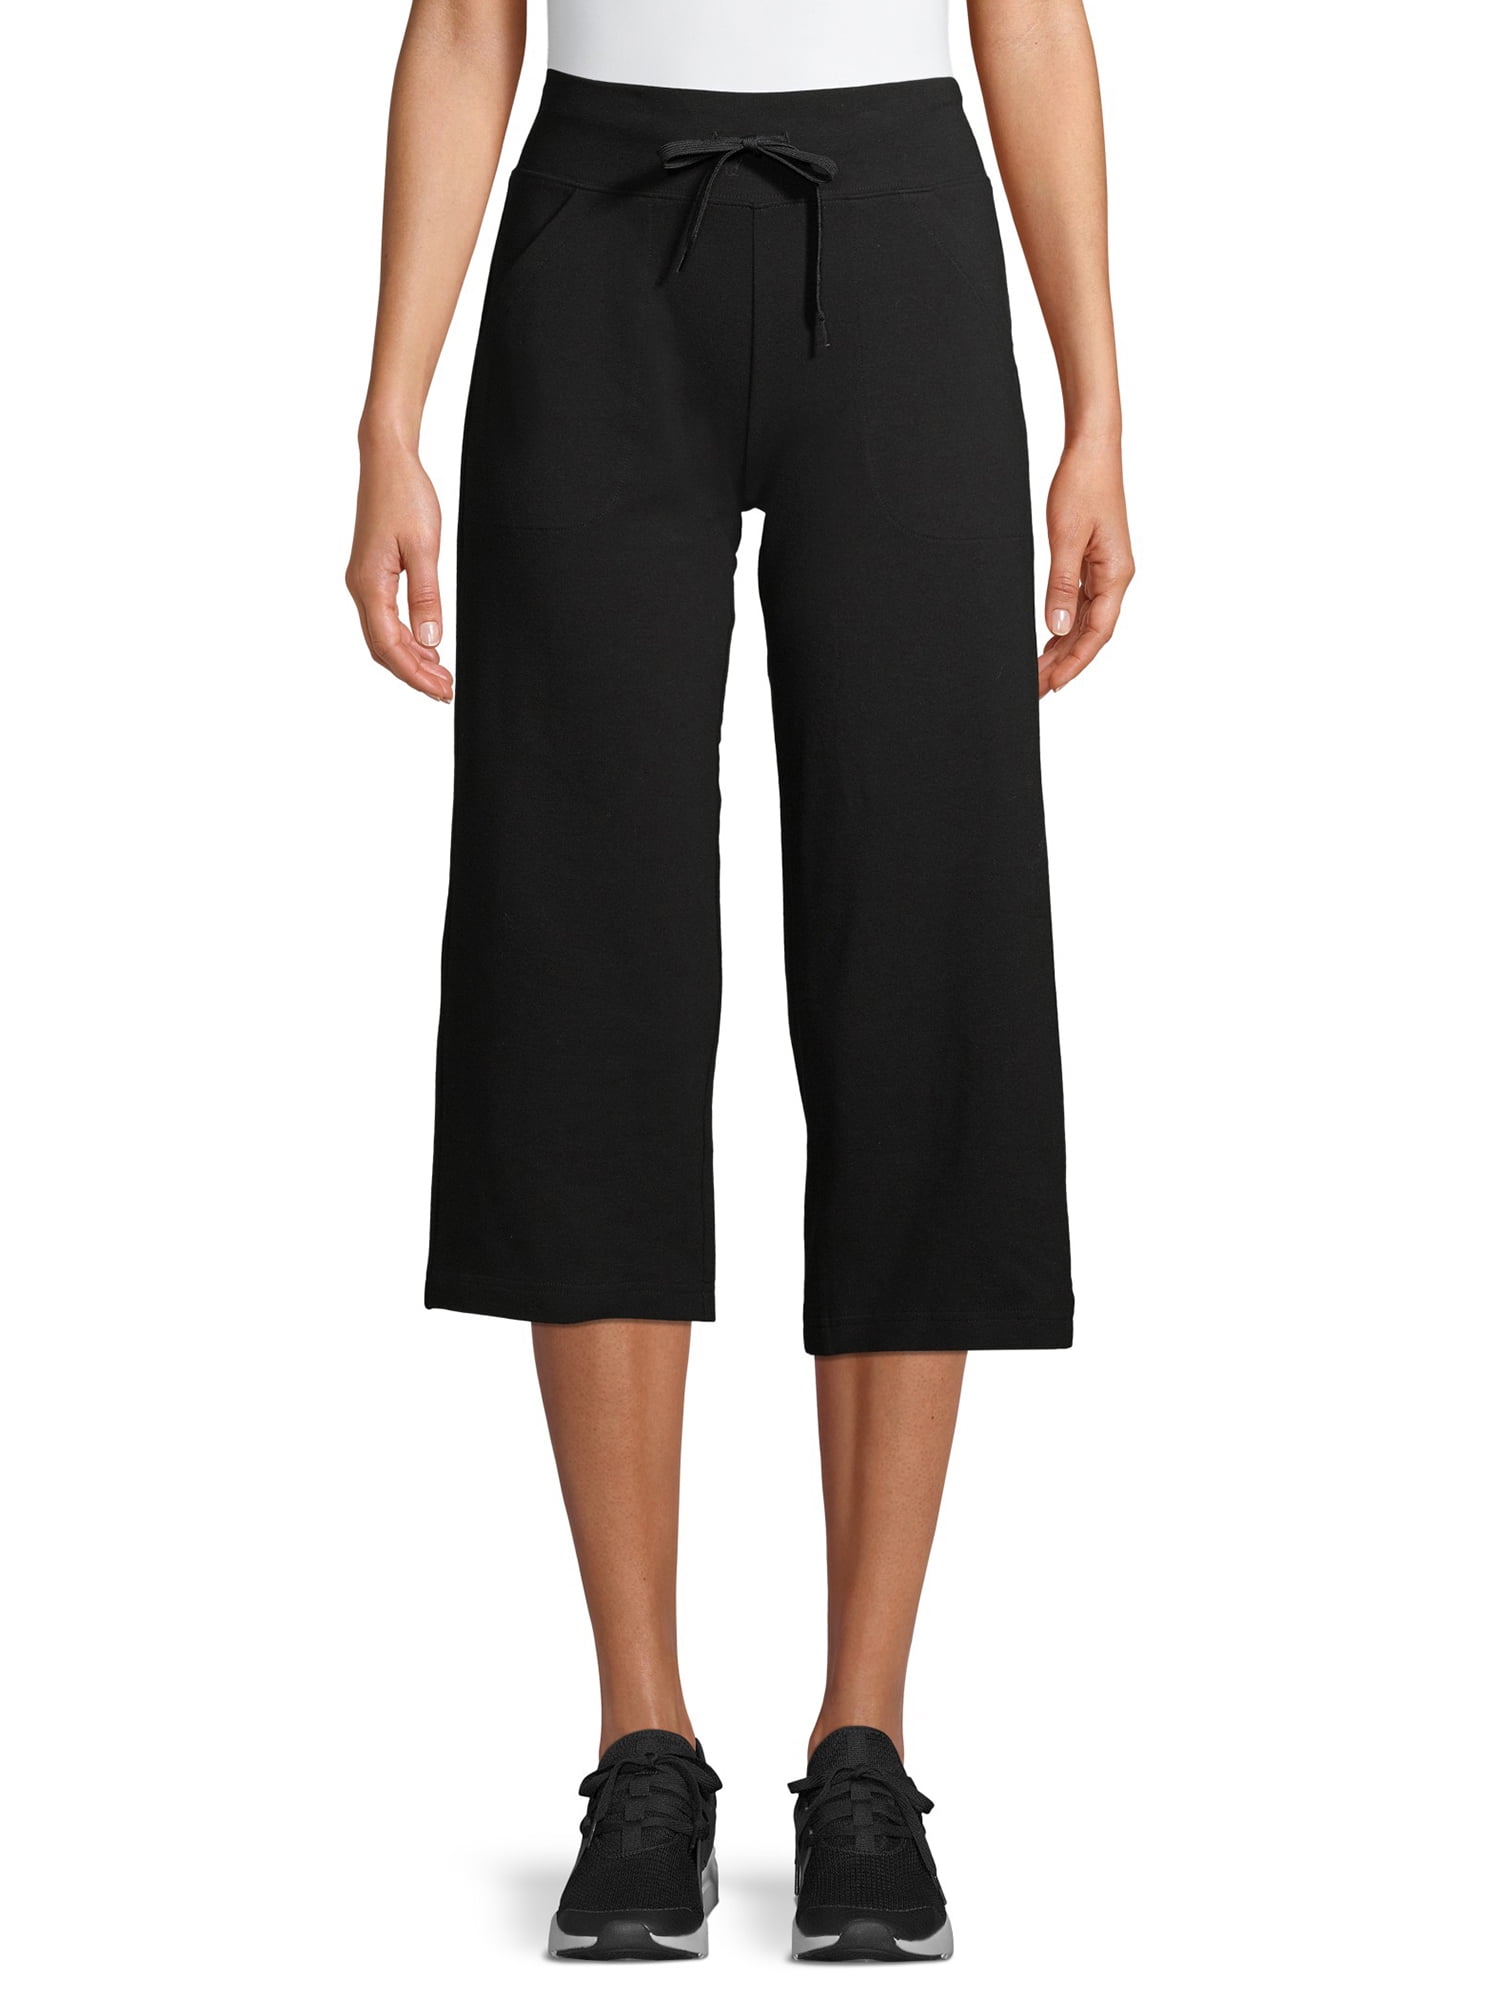 Athletic Works Women's Athleisure Relaxed Capri with Pockets - Walmart.com